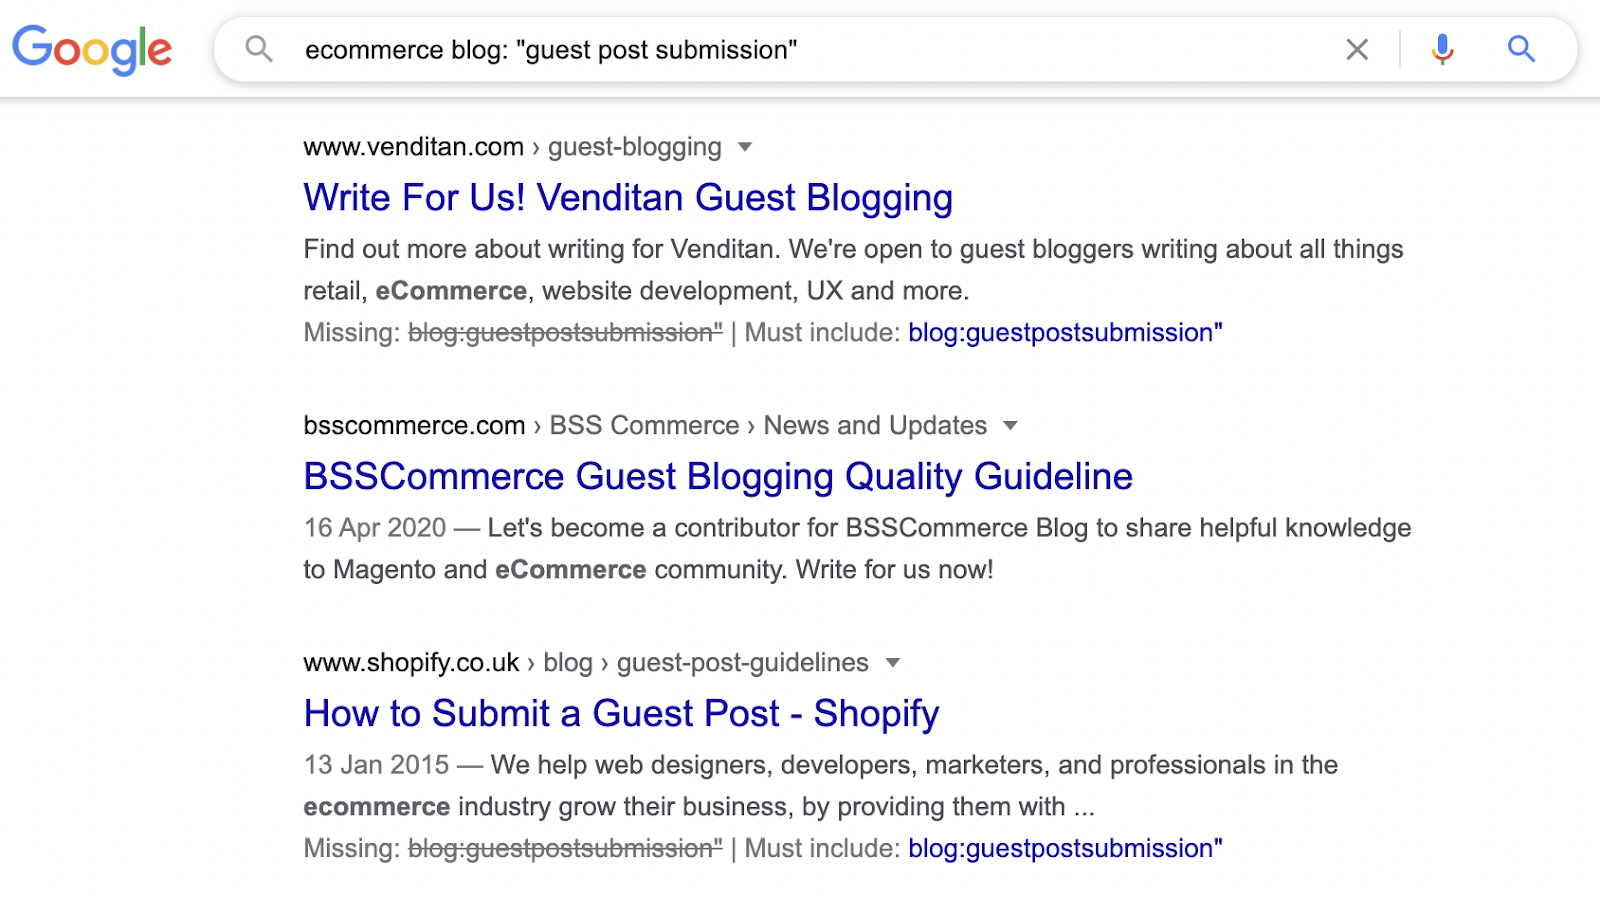 Search engine result pages showing guest blogging opportunities